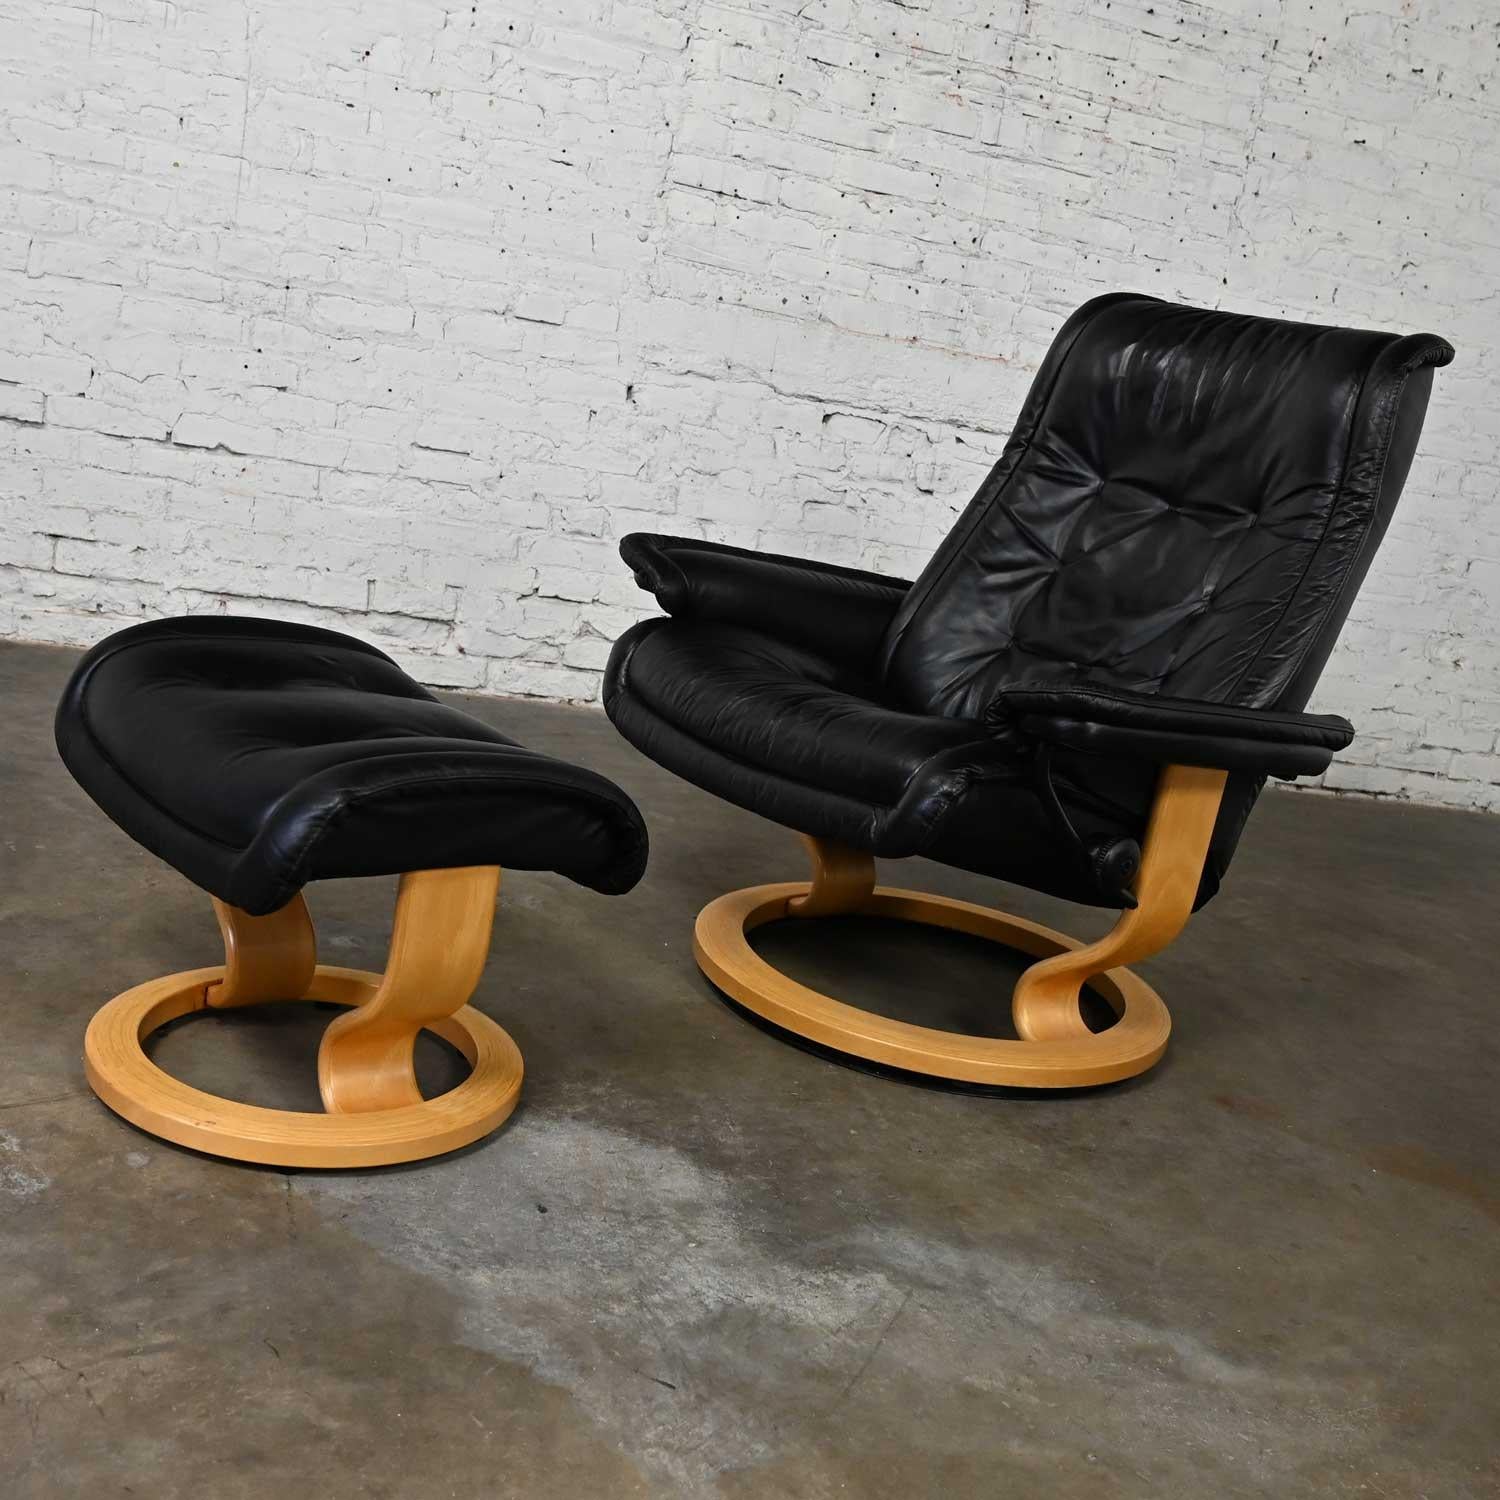 Pair Ekornes Stressless Royal Recliner Black Leather Lounge Chairs & Ottomans For Sale 1